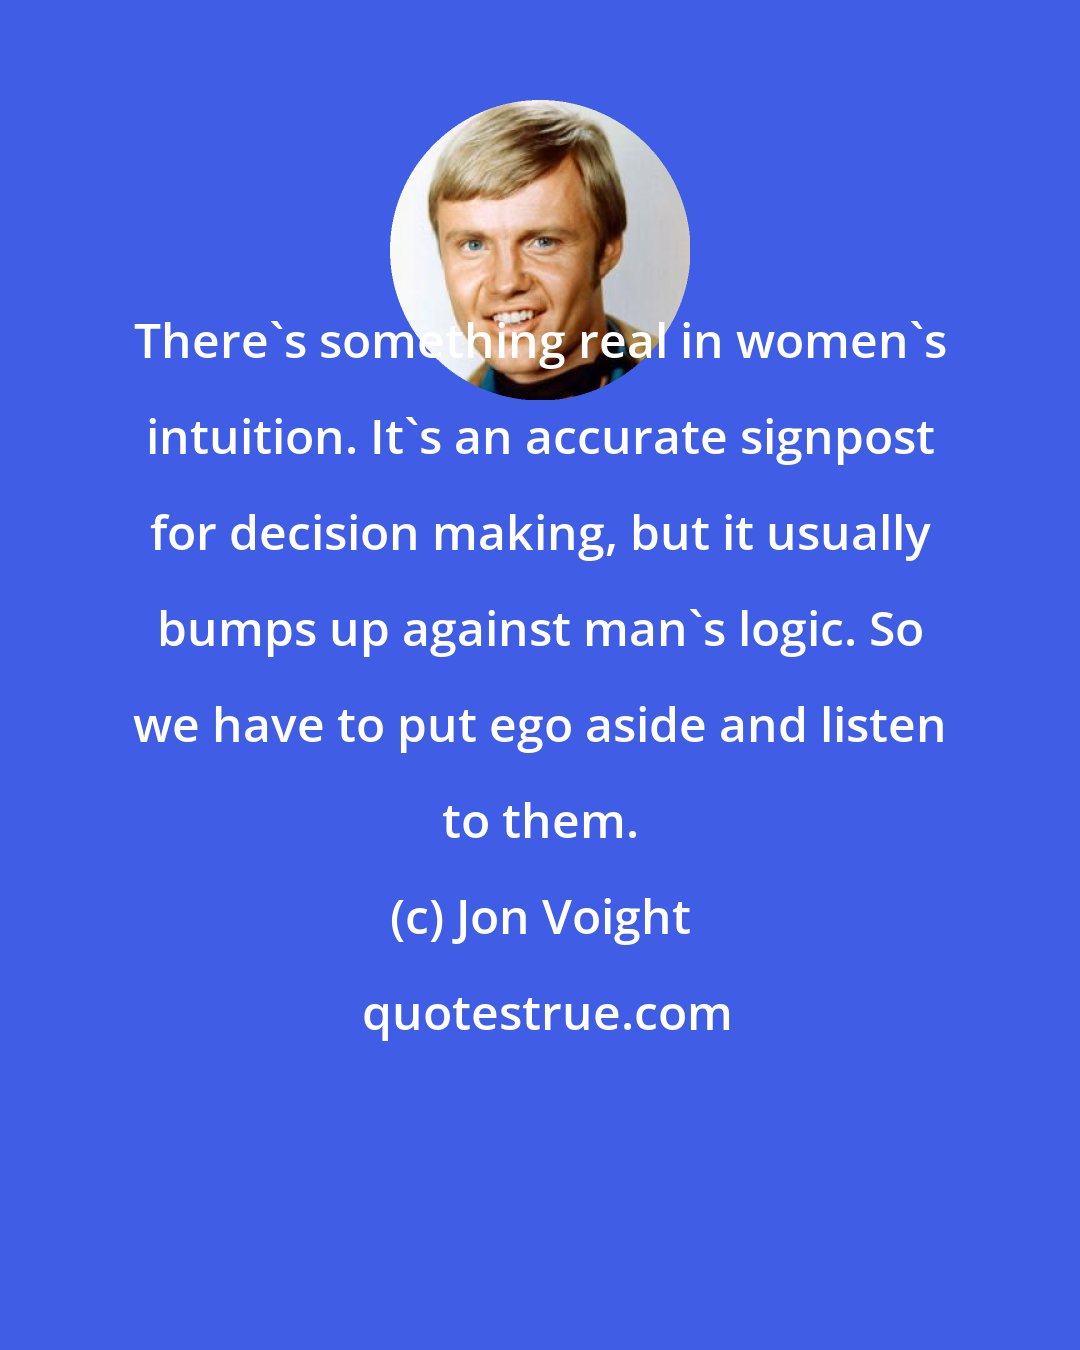 Jon Voight: There's something real in women's intuition. It's an accurate signpost for decision making, but it usually bumps up against man's logic. So we have to put ego aside and listen to them.